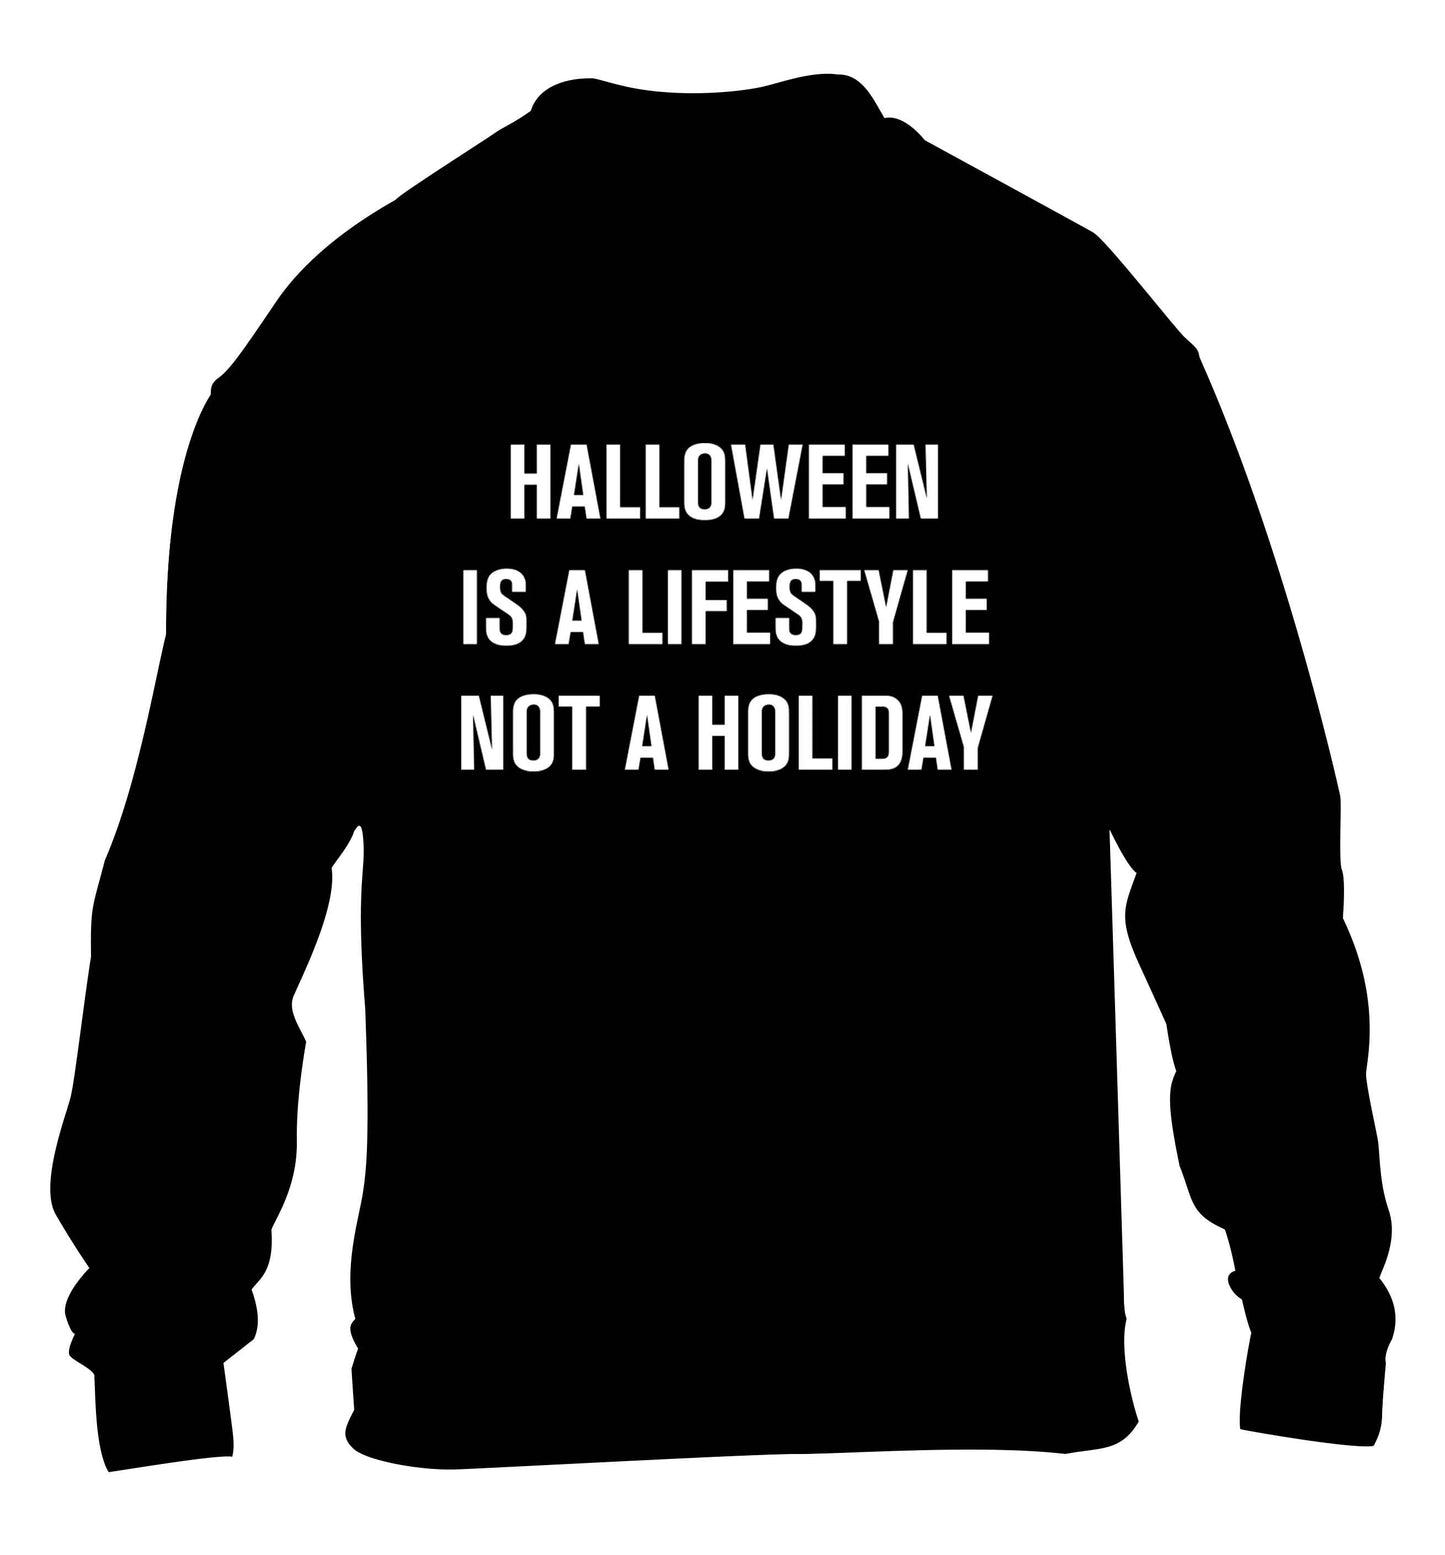 Halloween is a lifestyle not a holiday children's black sweater 12-13 Years